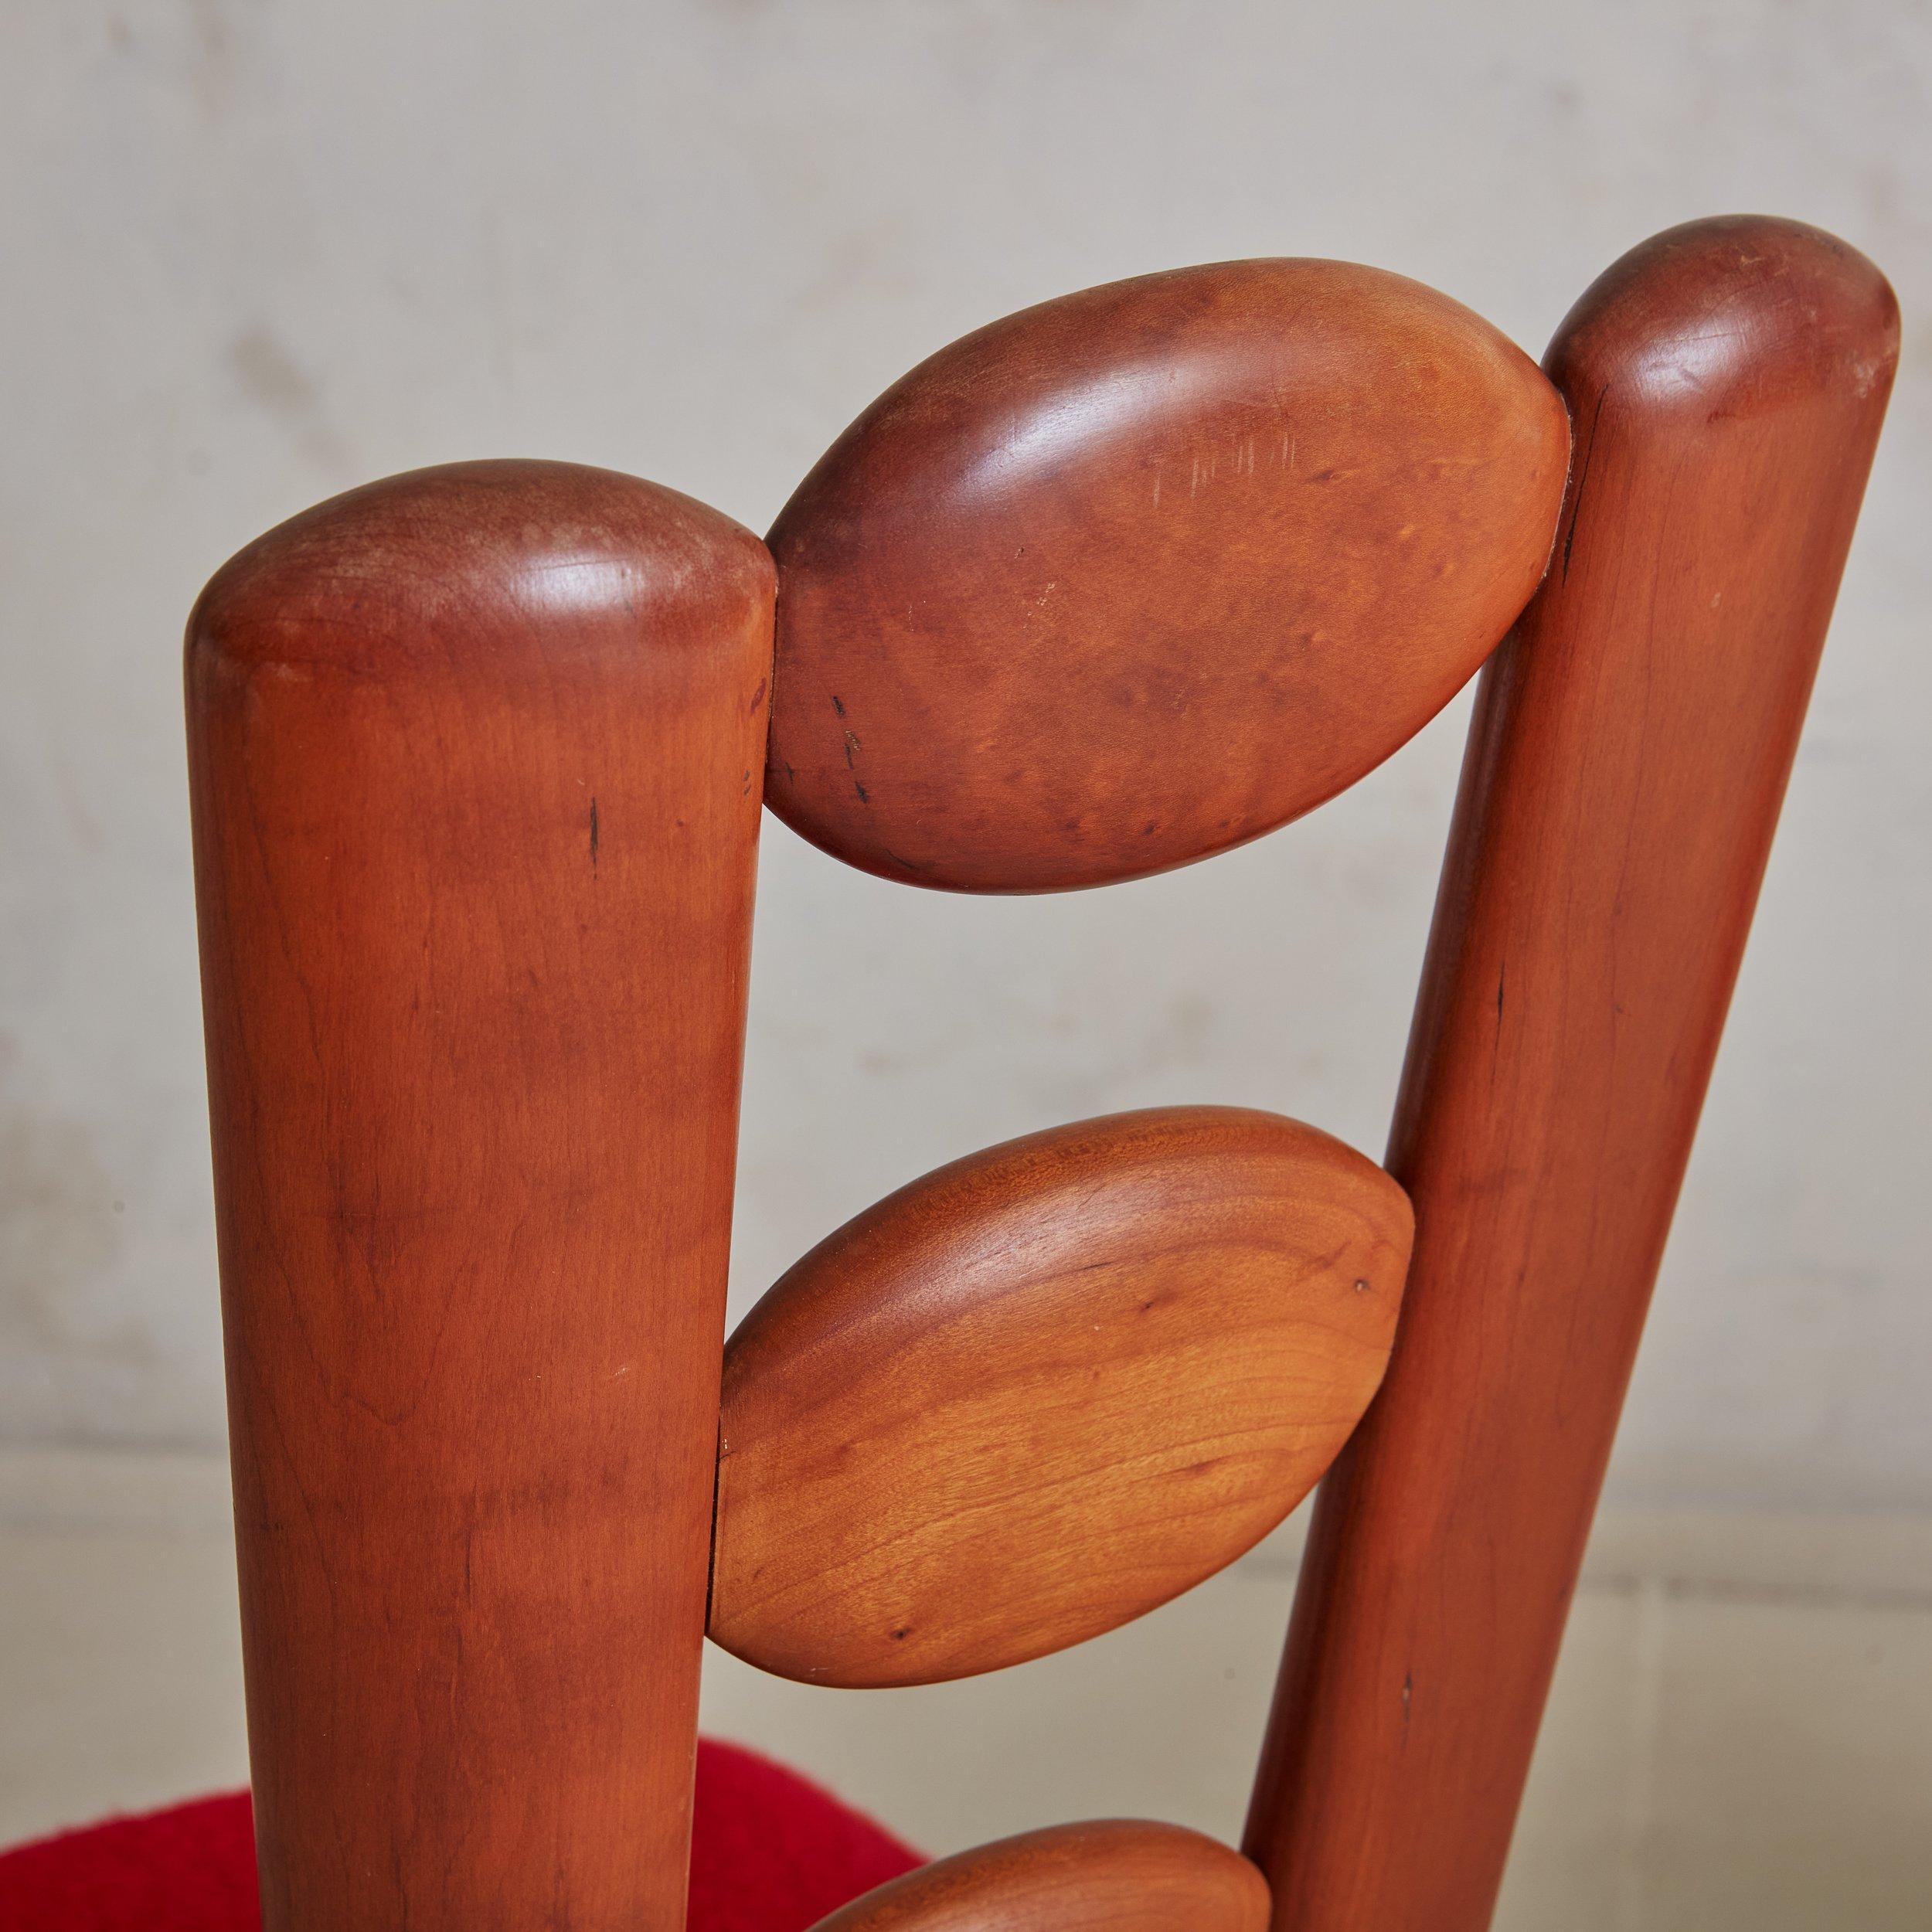 Set of 4 Teak Dining Chairs, Denmark 1960s For Sale 1